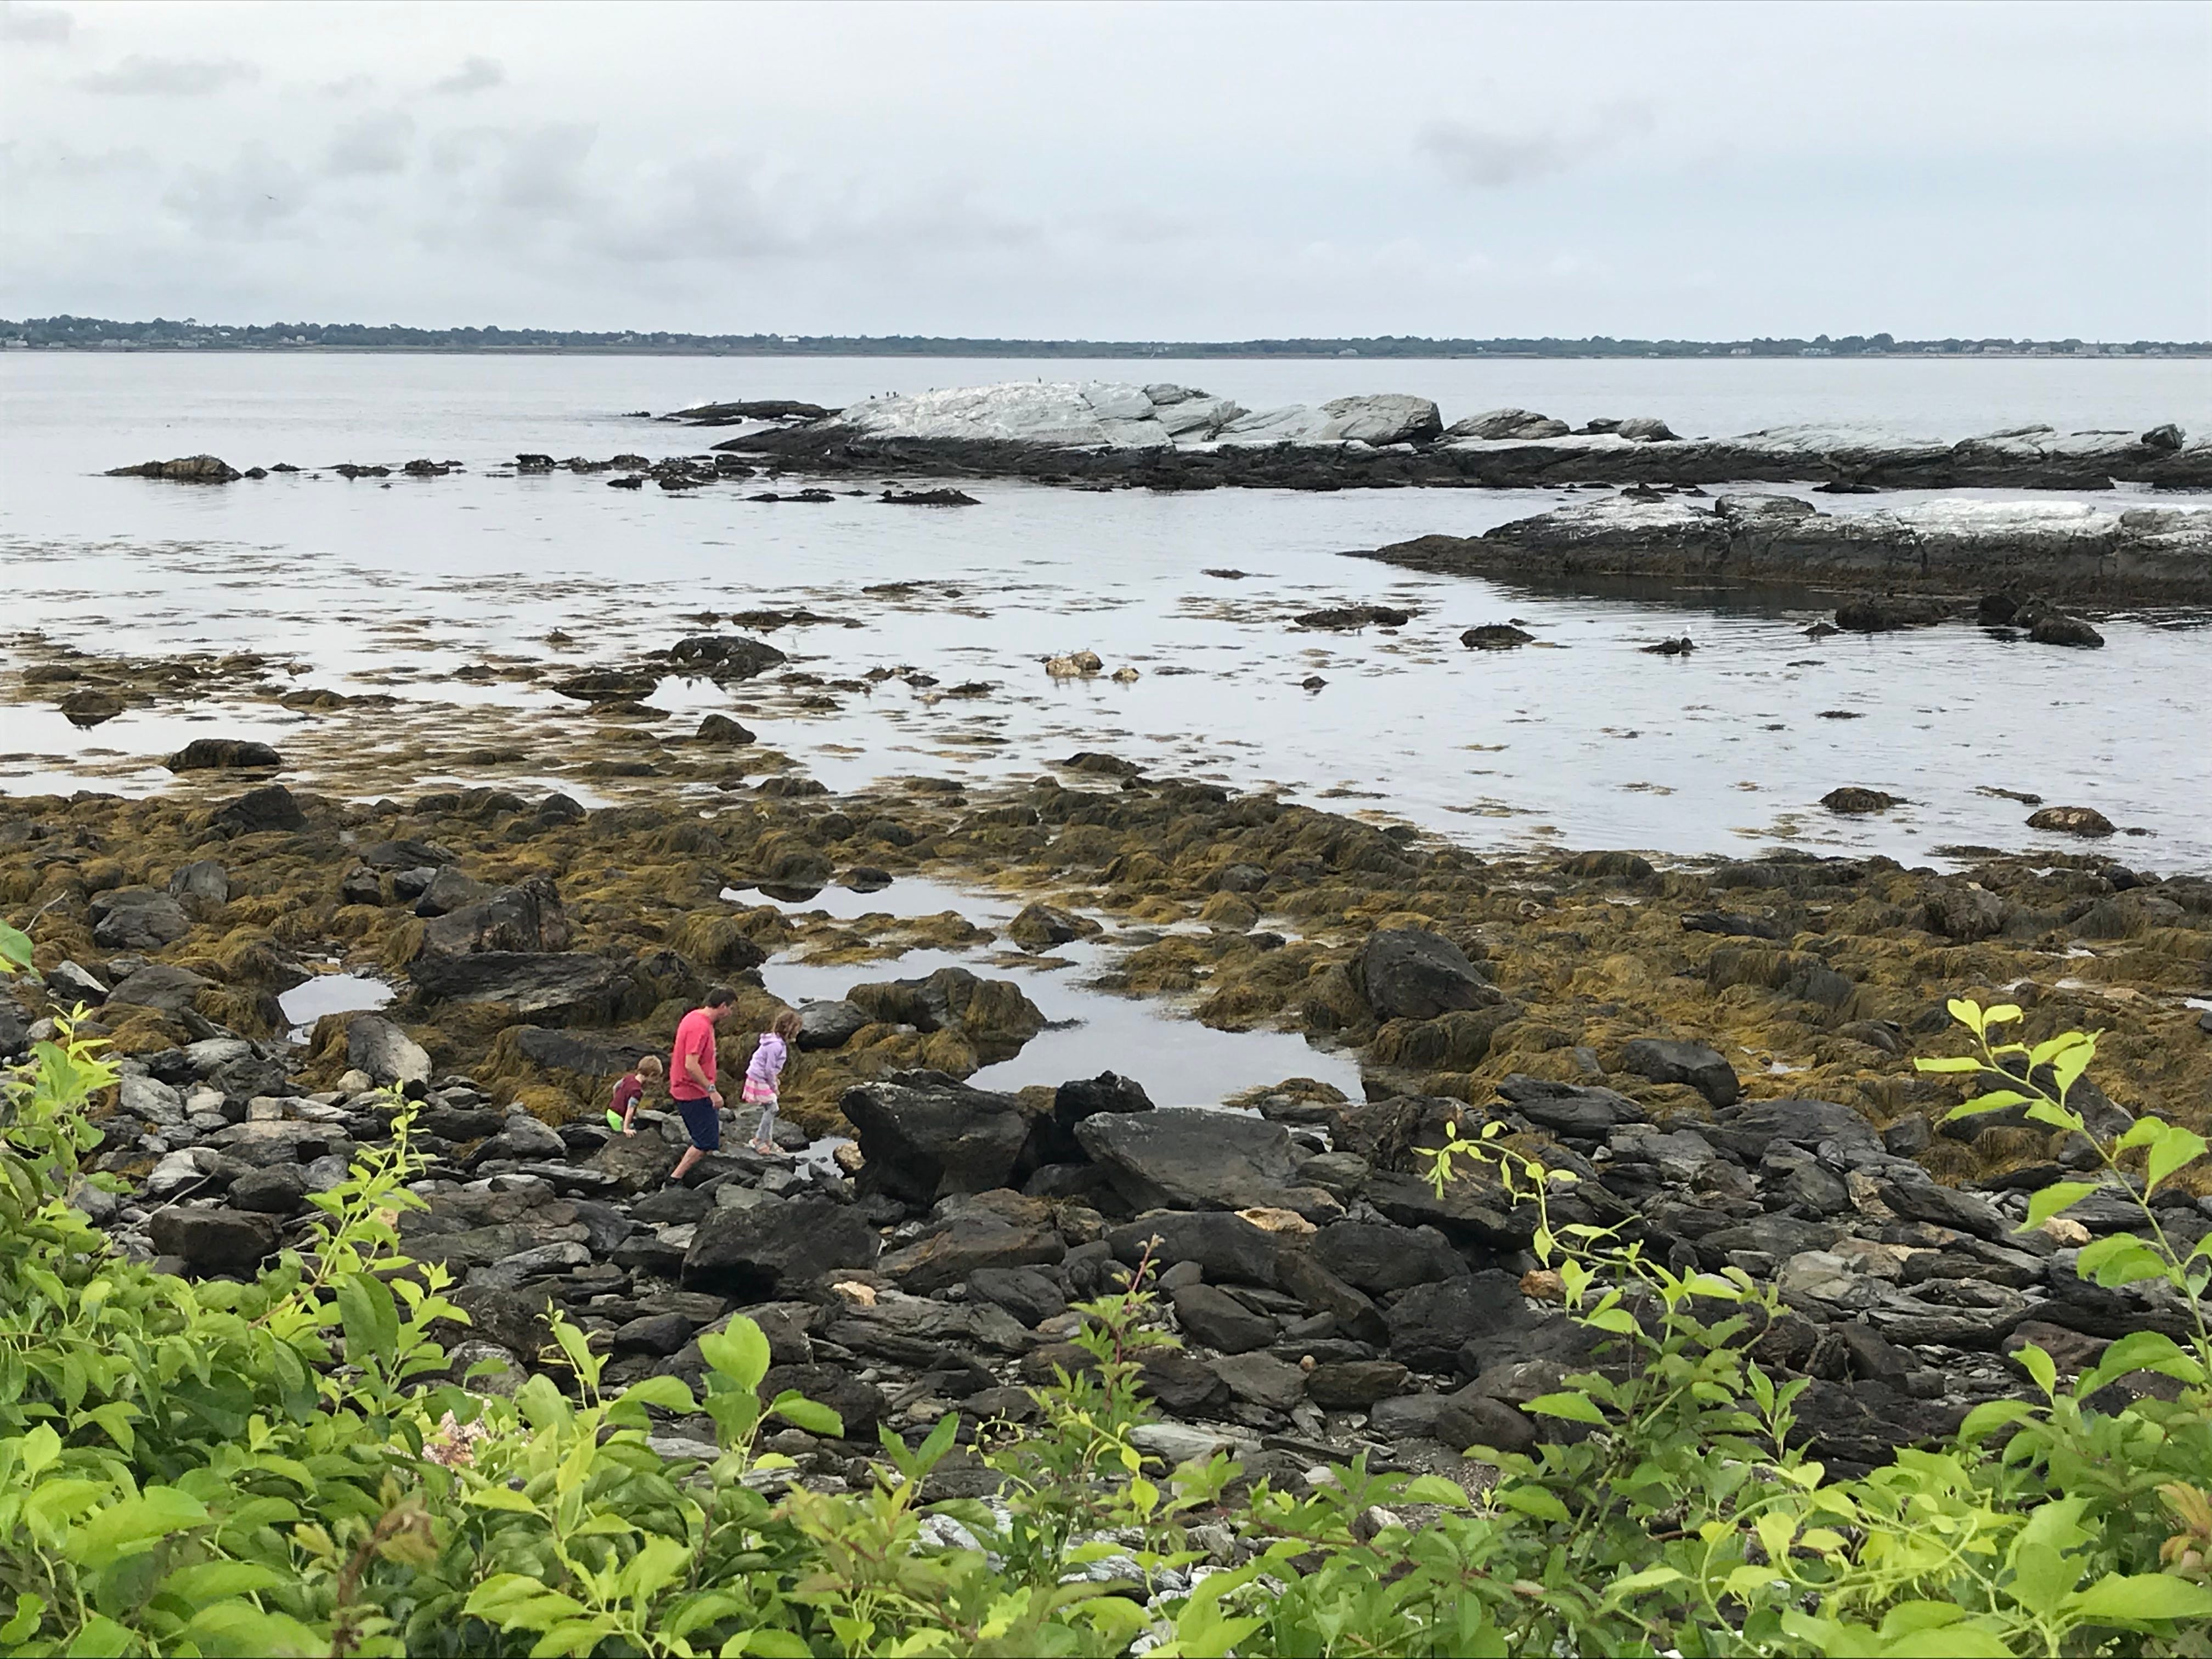 A man and two children hike along a rocky shoreline.